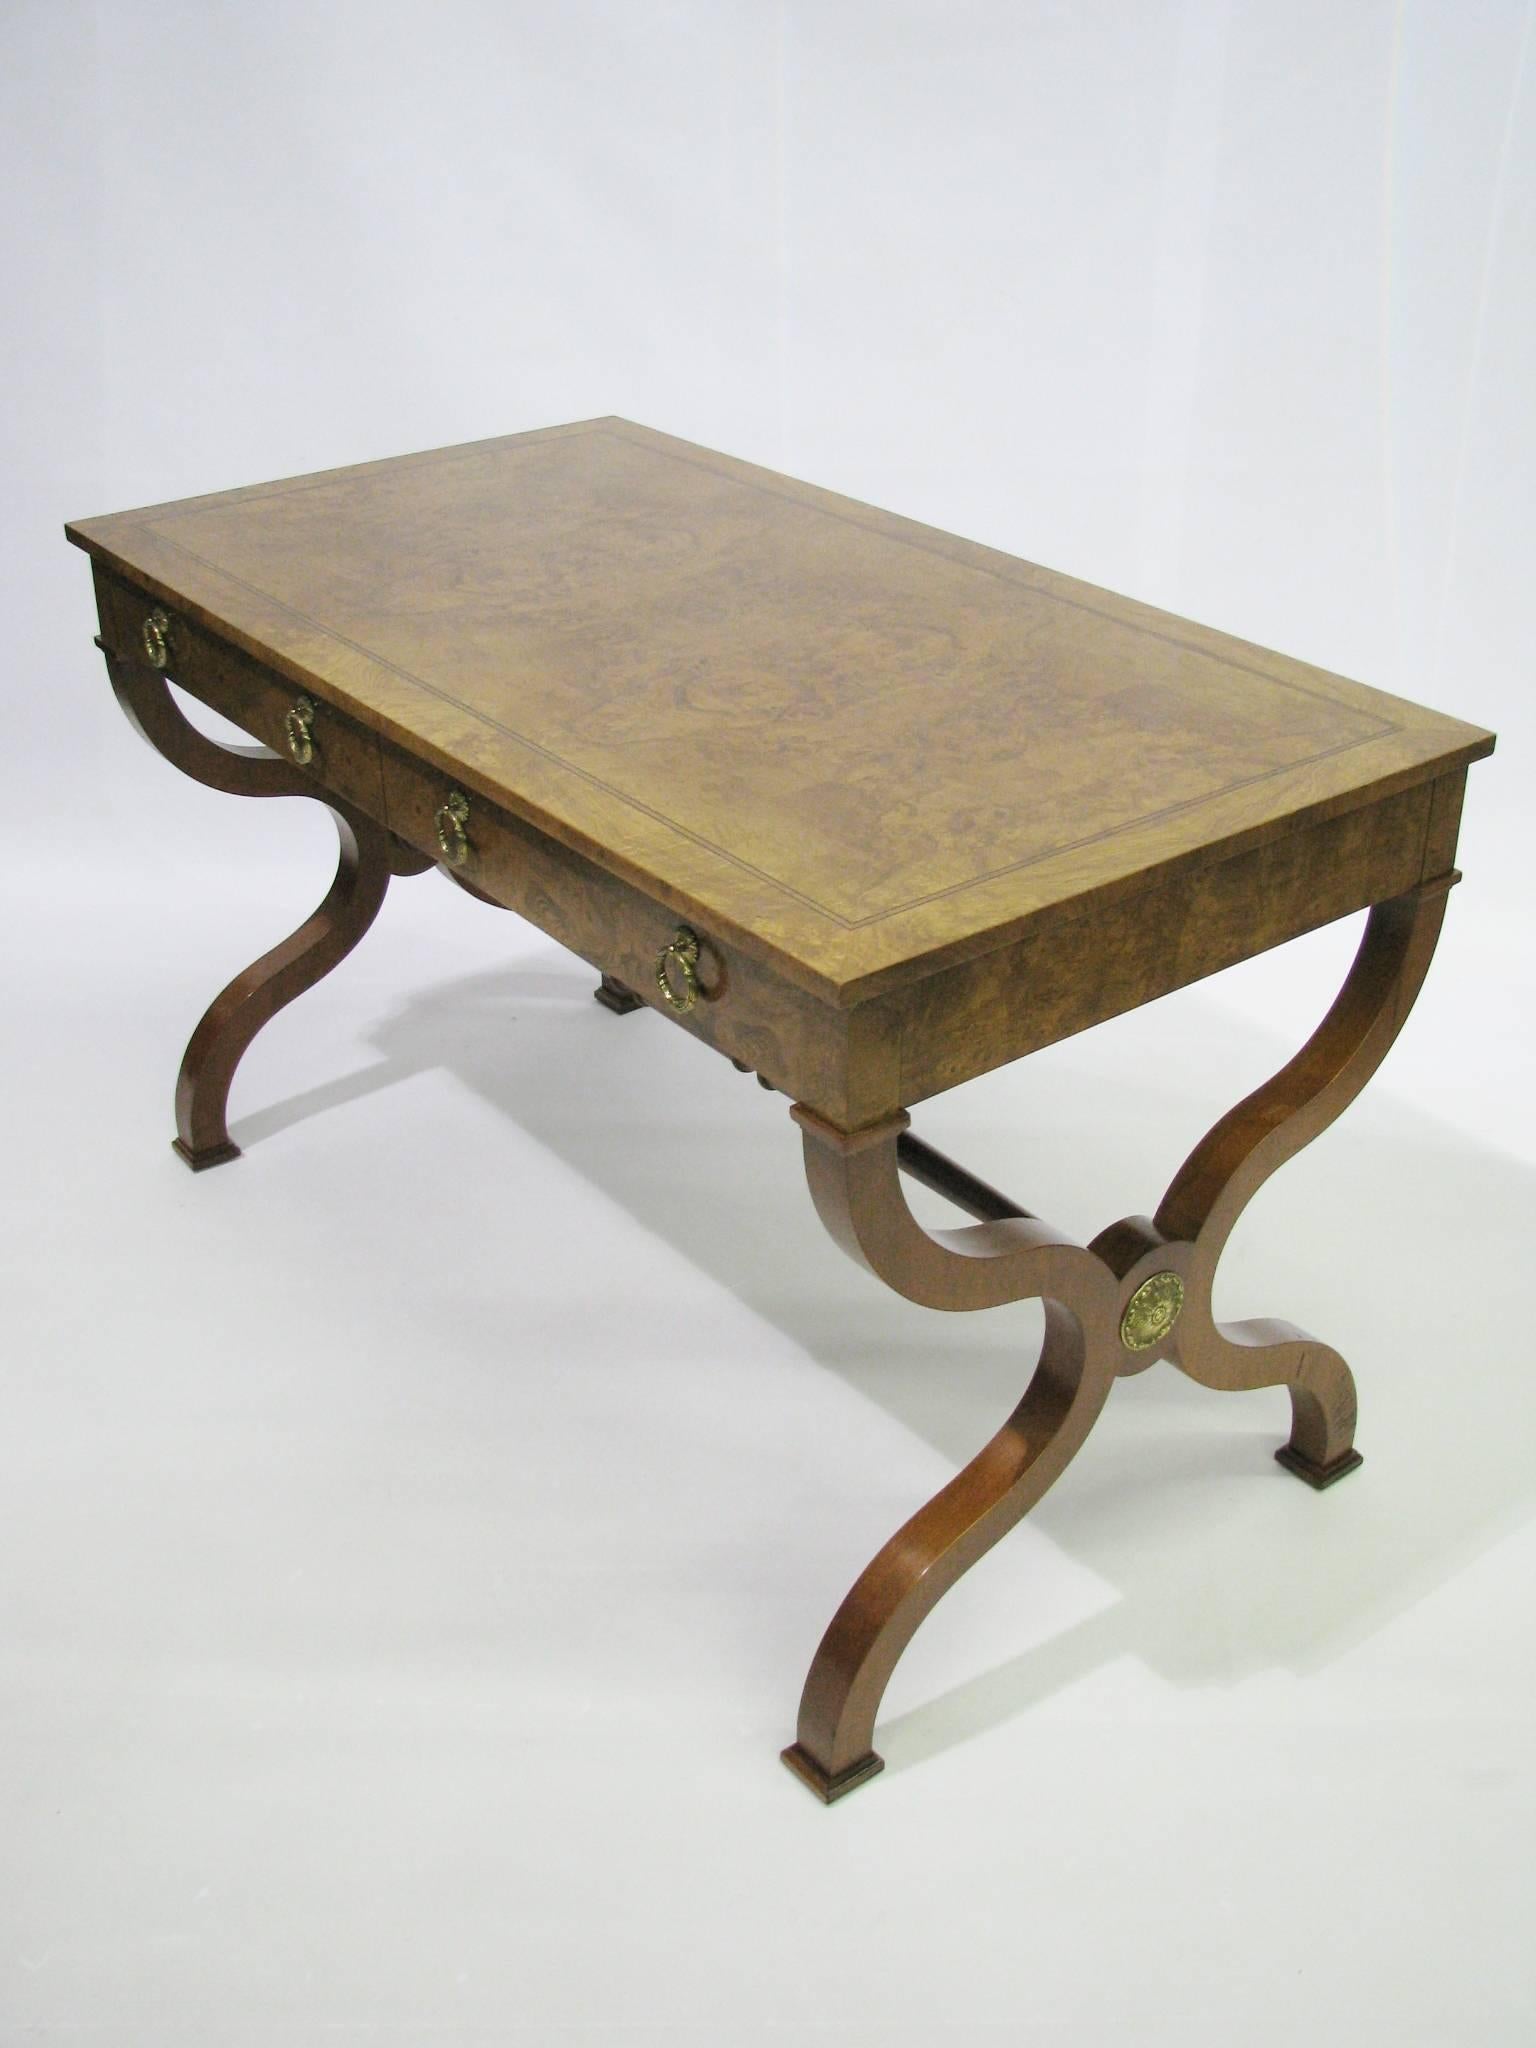 Beautiful and beautifully made Regency style writing desk or library table by Baker Furniture. Burl walnut veneers cover the top and all four sides of the case. The legs are solid hardwood. A contrasting band of ebonized stringing details the top's